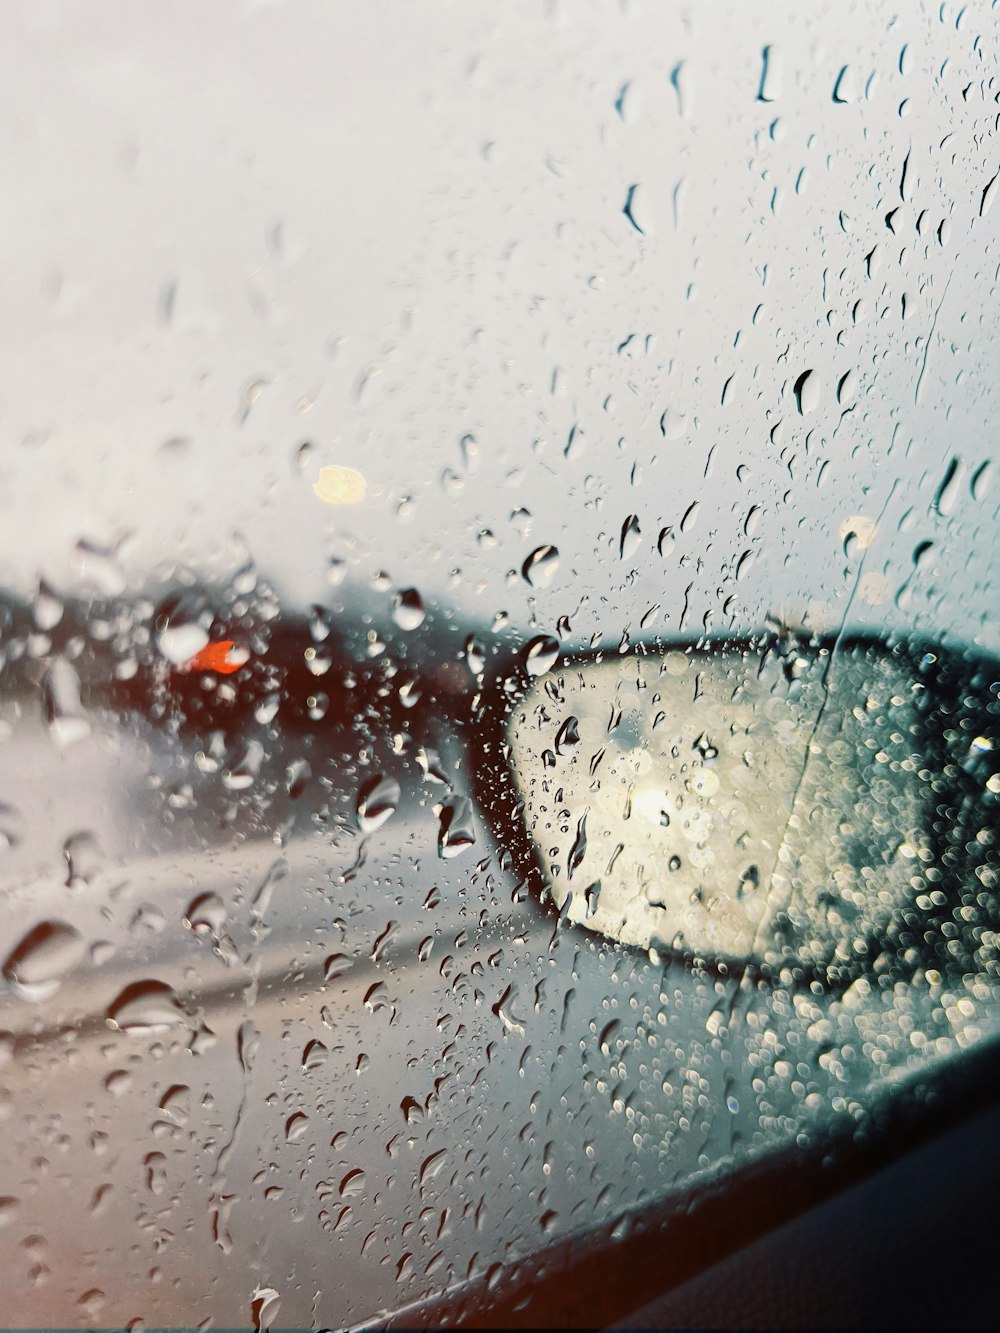 a car's side view mirror on a rainy day